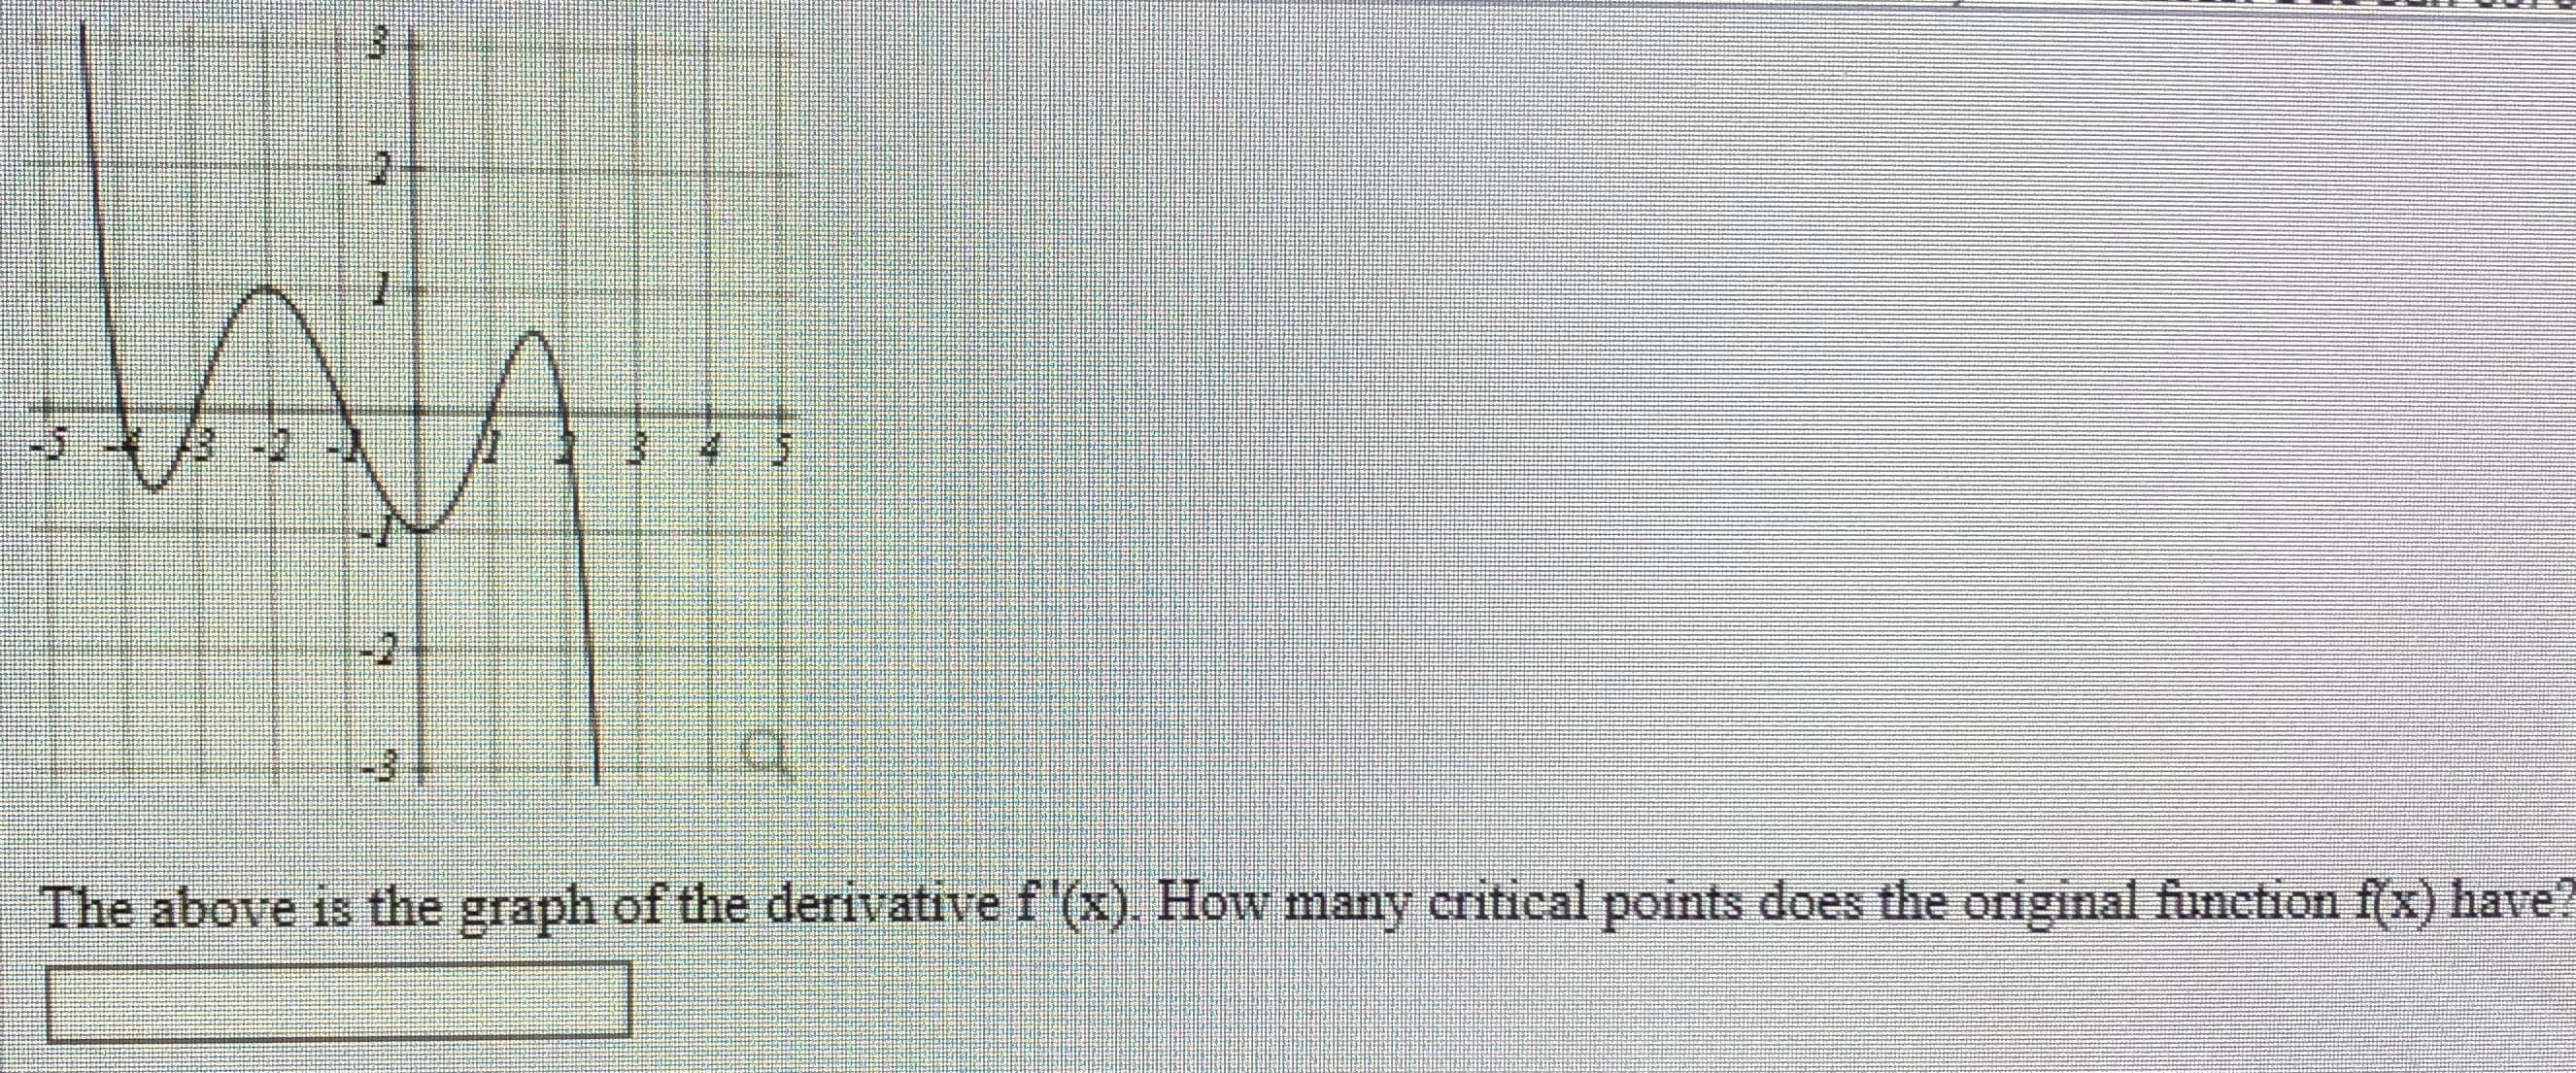 2.
-2
-31
The above is the graph of the derivative f (x). How many critical points does the original function f(x) have?
